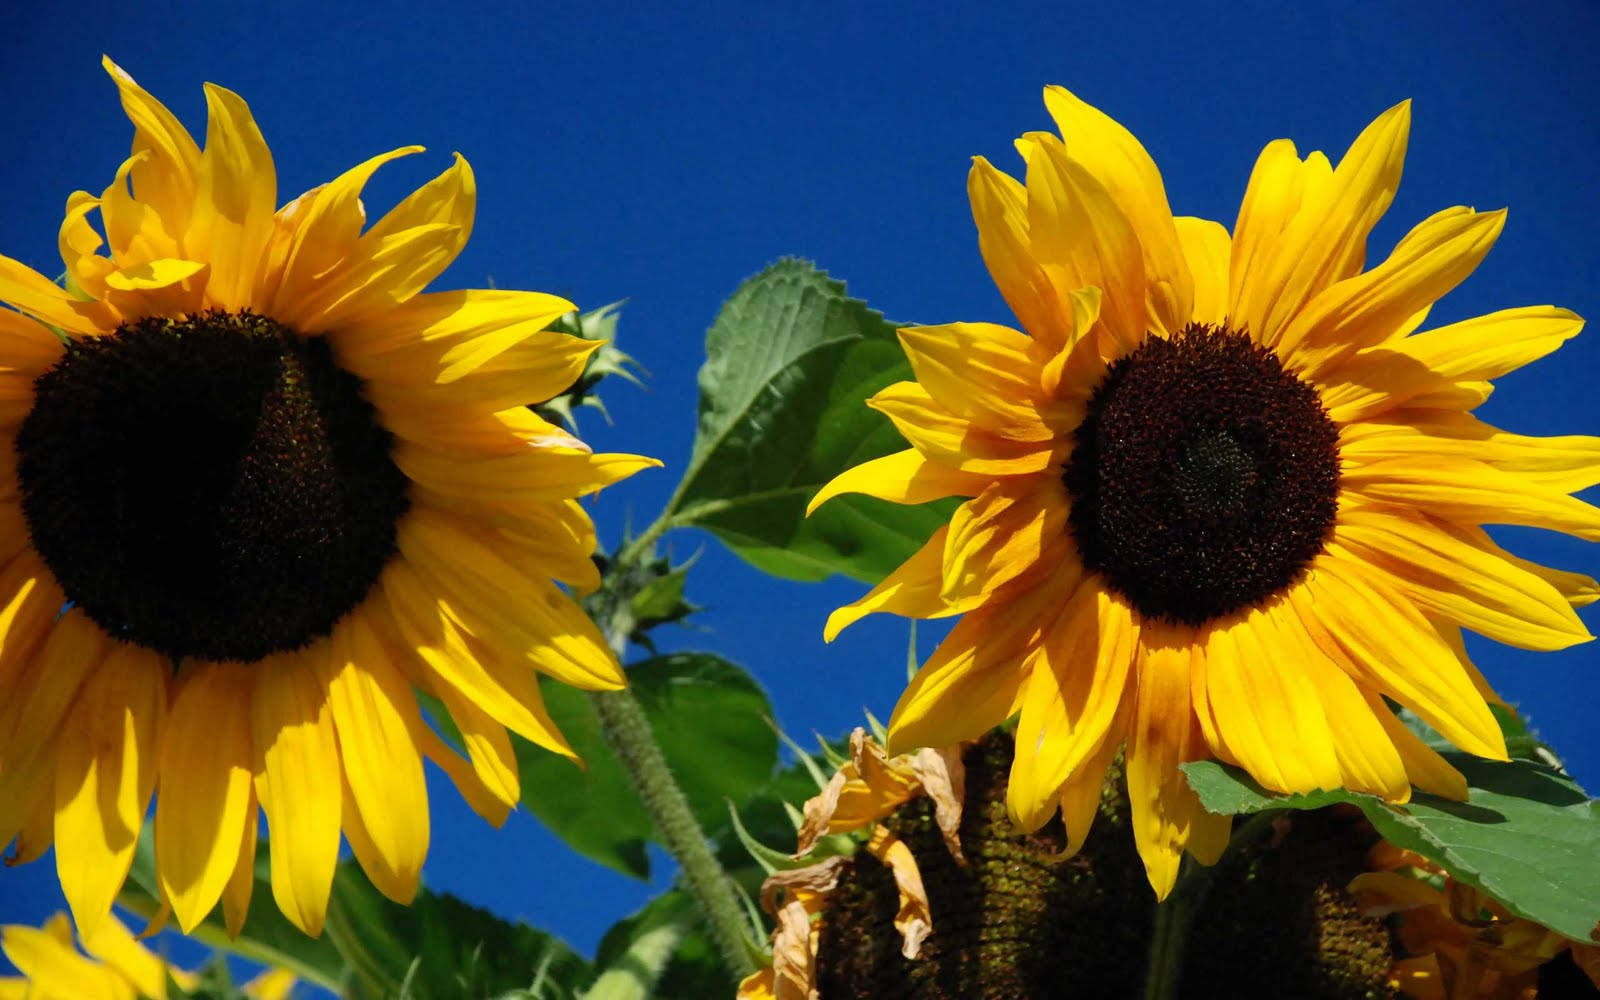 A sunflower in full bloom sits against a bright yellow background Wallpaper